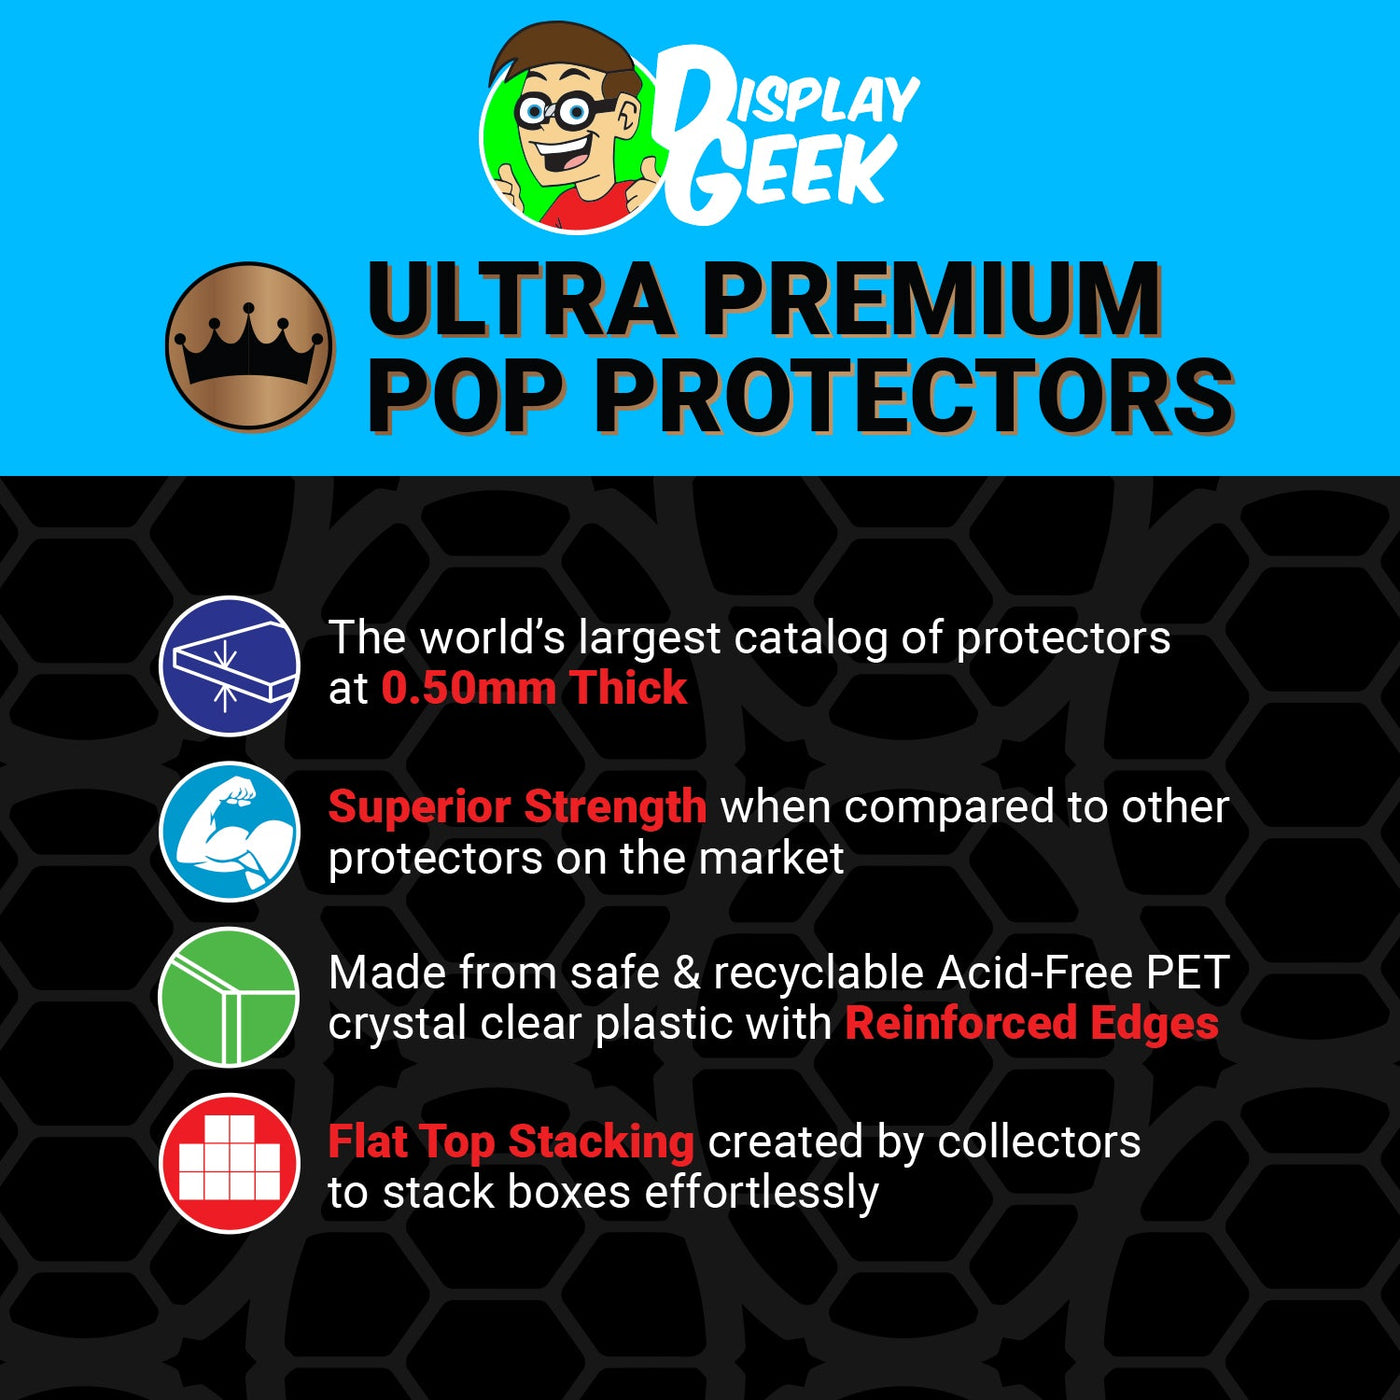 Pop Protector for Freddy Funko Rain City Freddy on The Protector Guide App by Display Geek